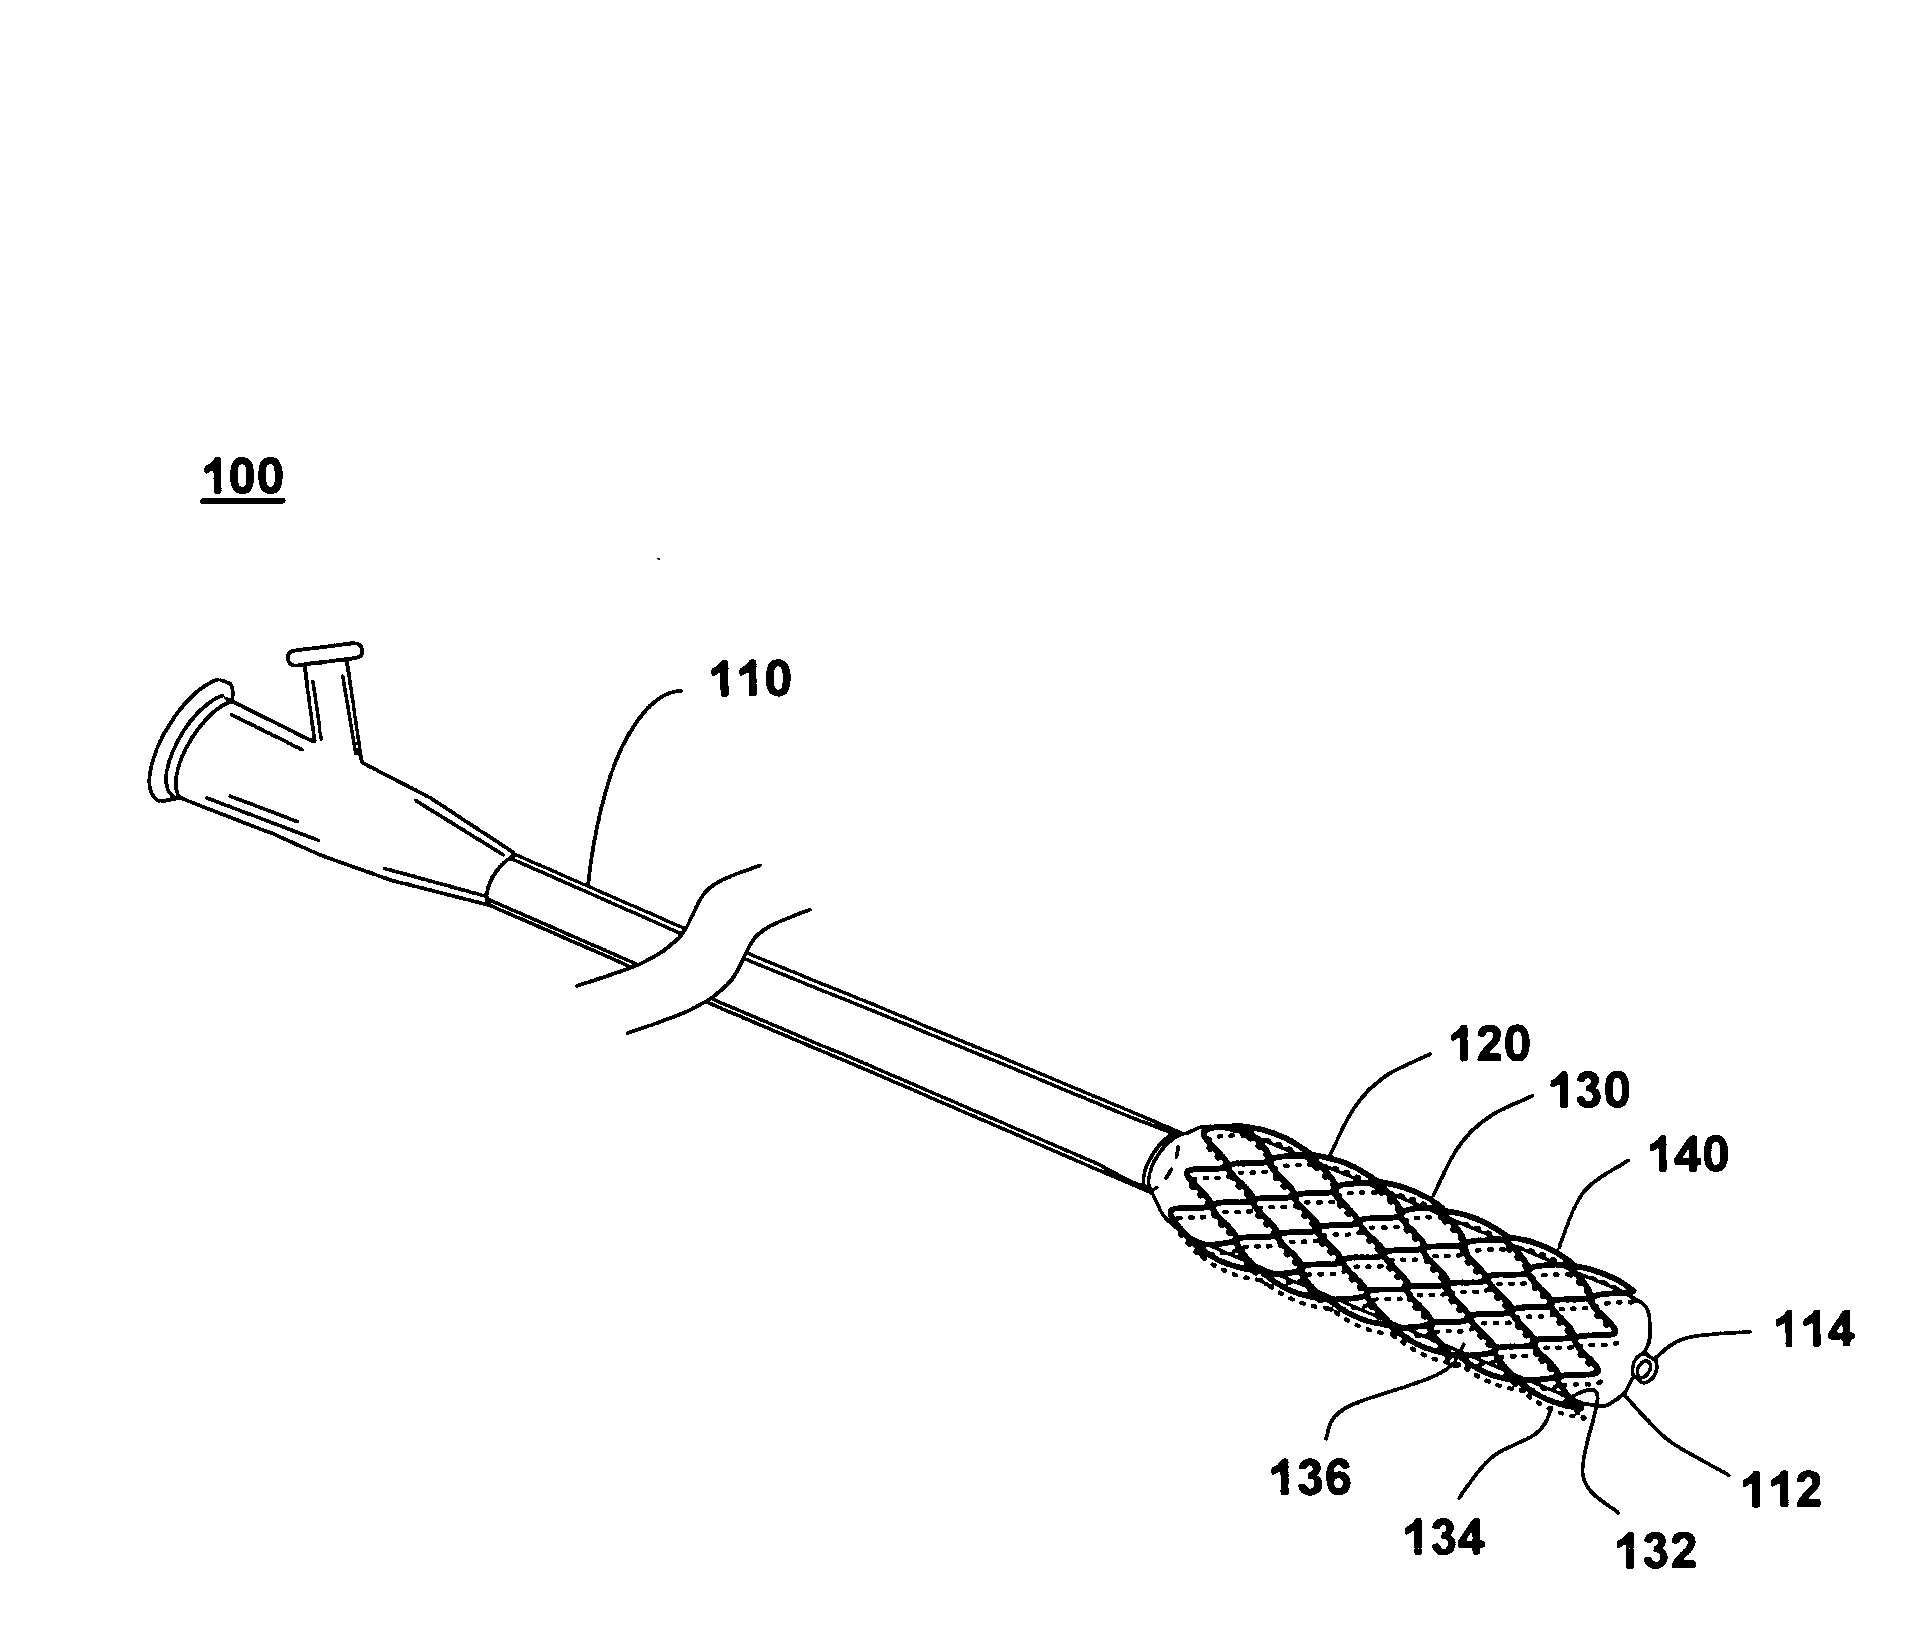 Extrusion process for coating stents